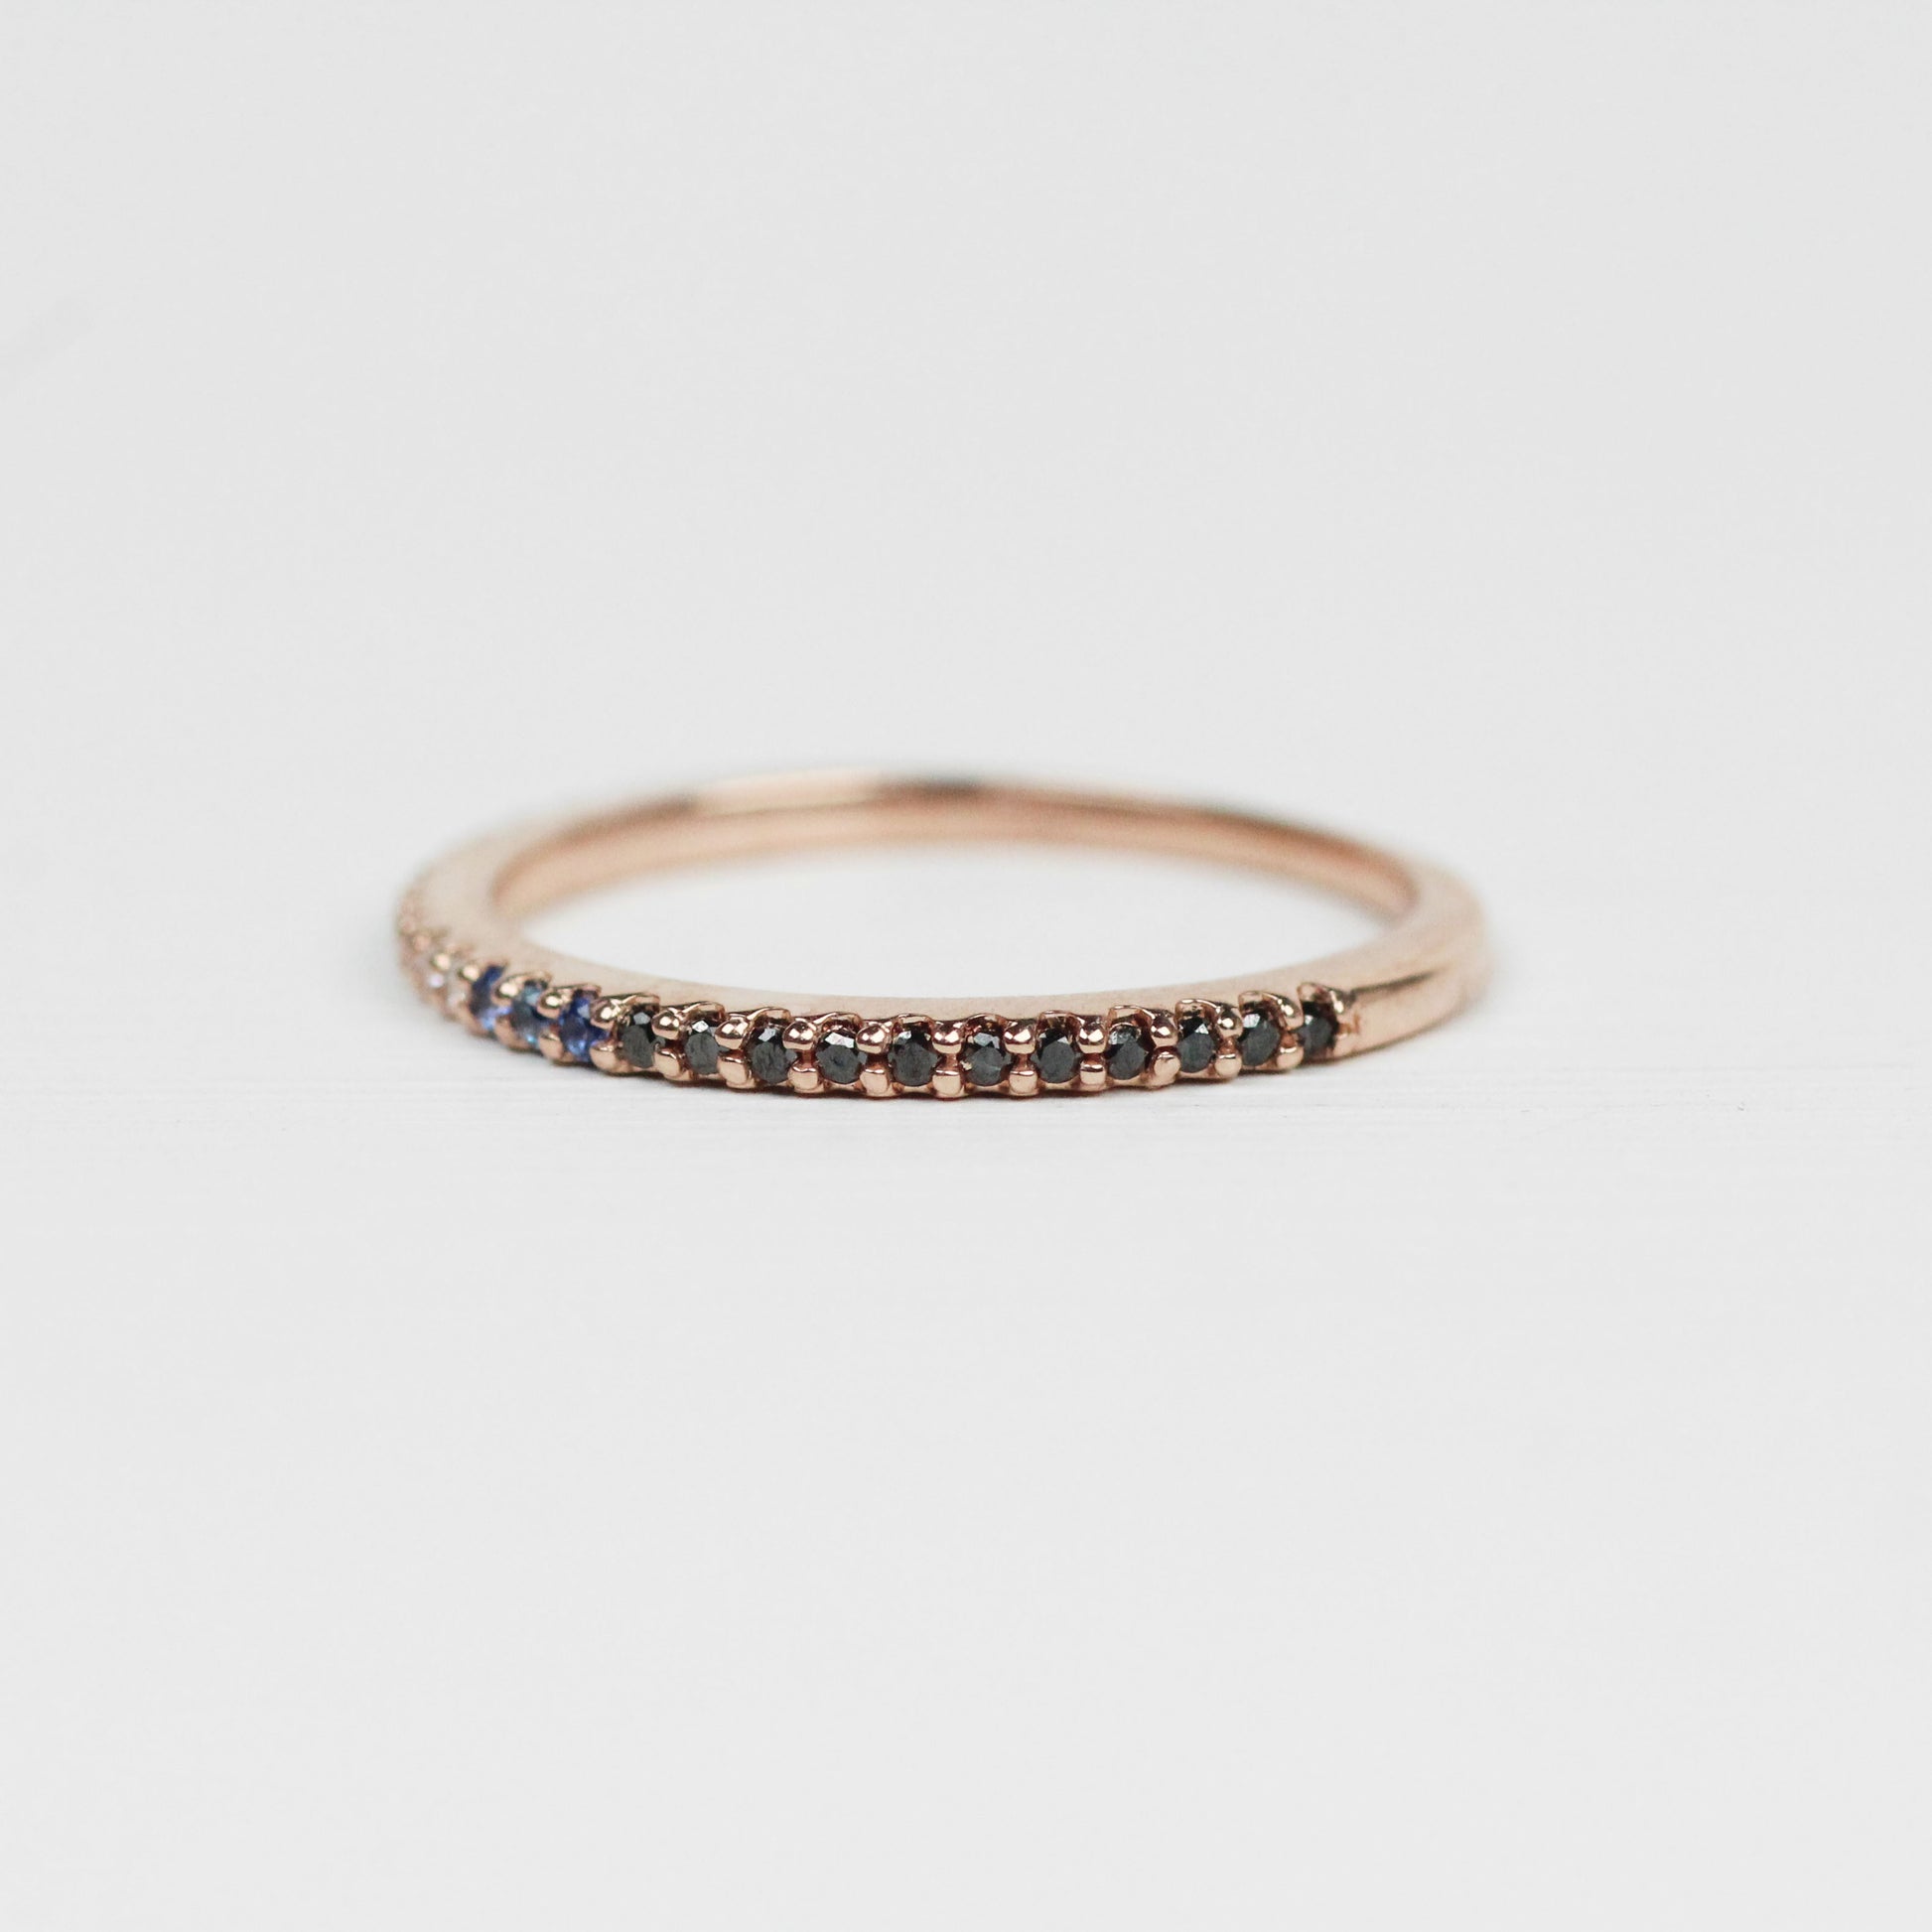 Multi-toned Constance - Pave set, minimal diamond wedding stacking band - Midwinter Co. Alternative Bridal Rings and Modern Fine Jewelry